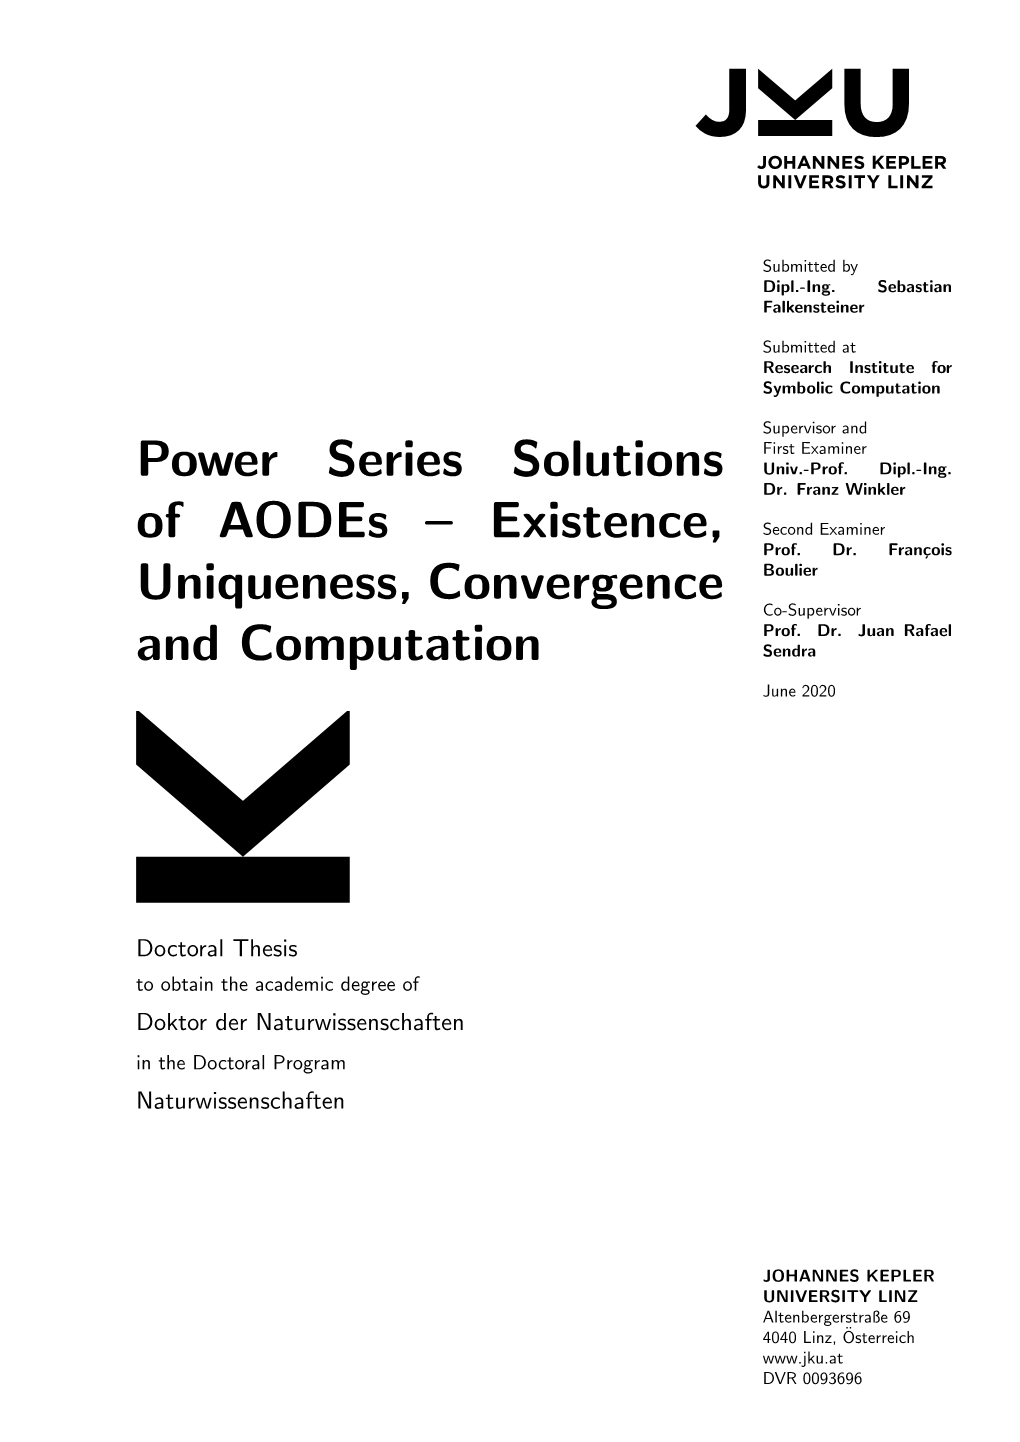 Power Series Solutions of Aodes